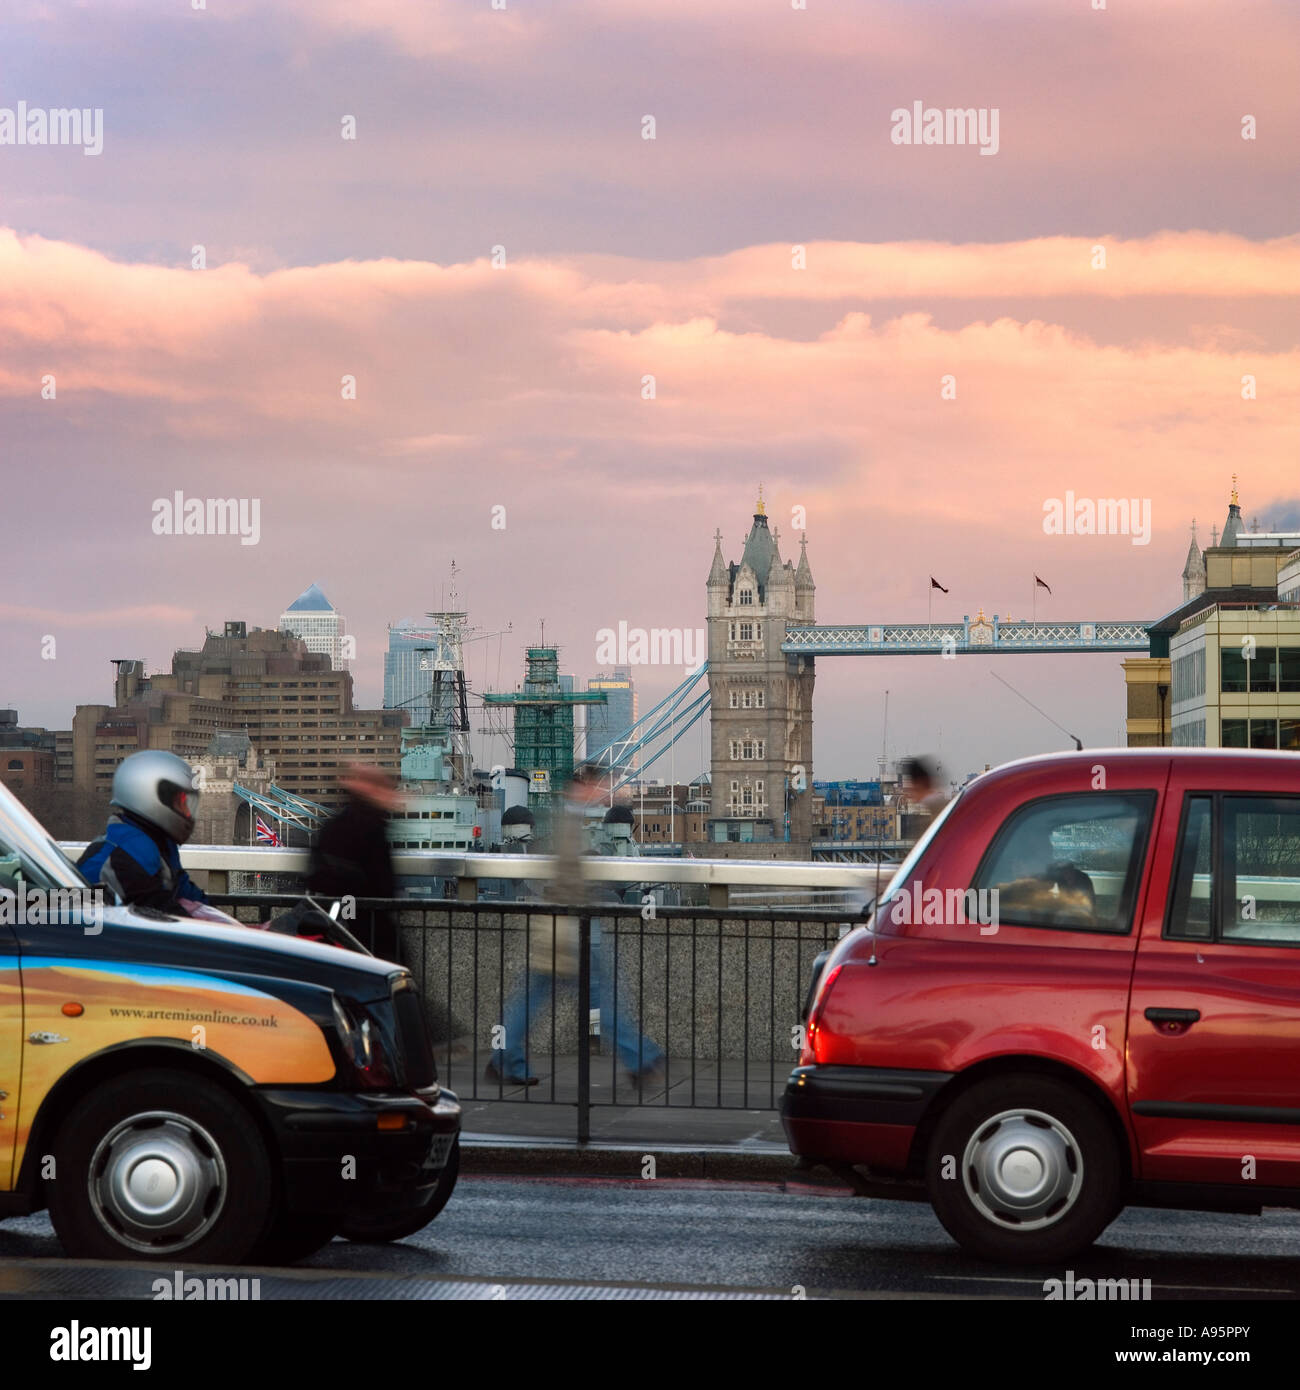 London Pink Cab High Resolution Stock Photography and Images - Alamy